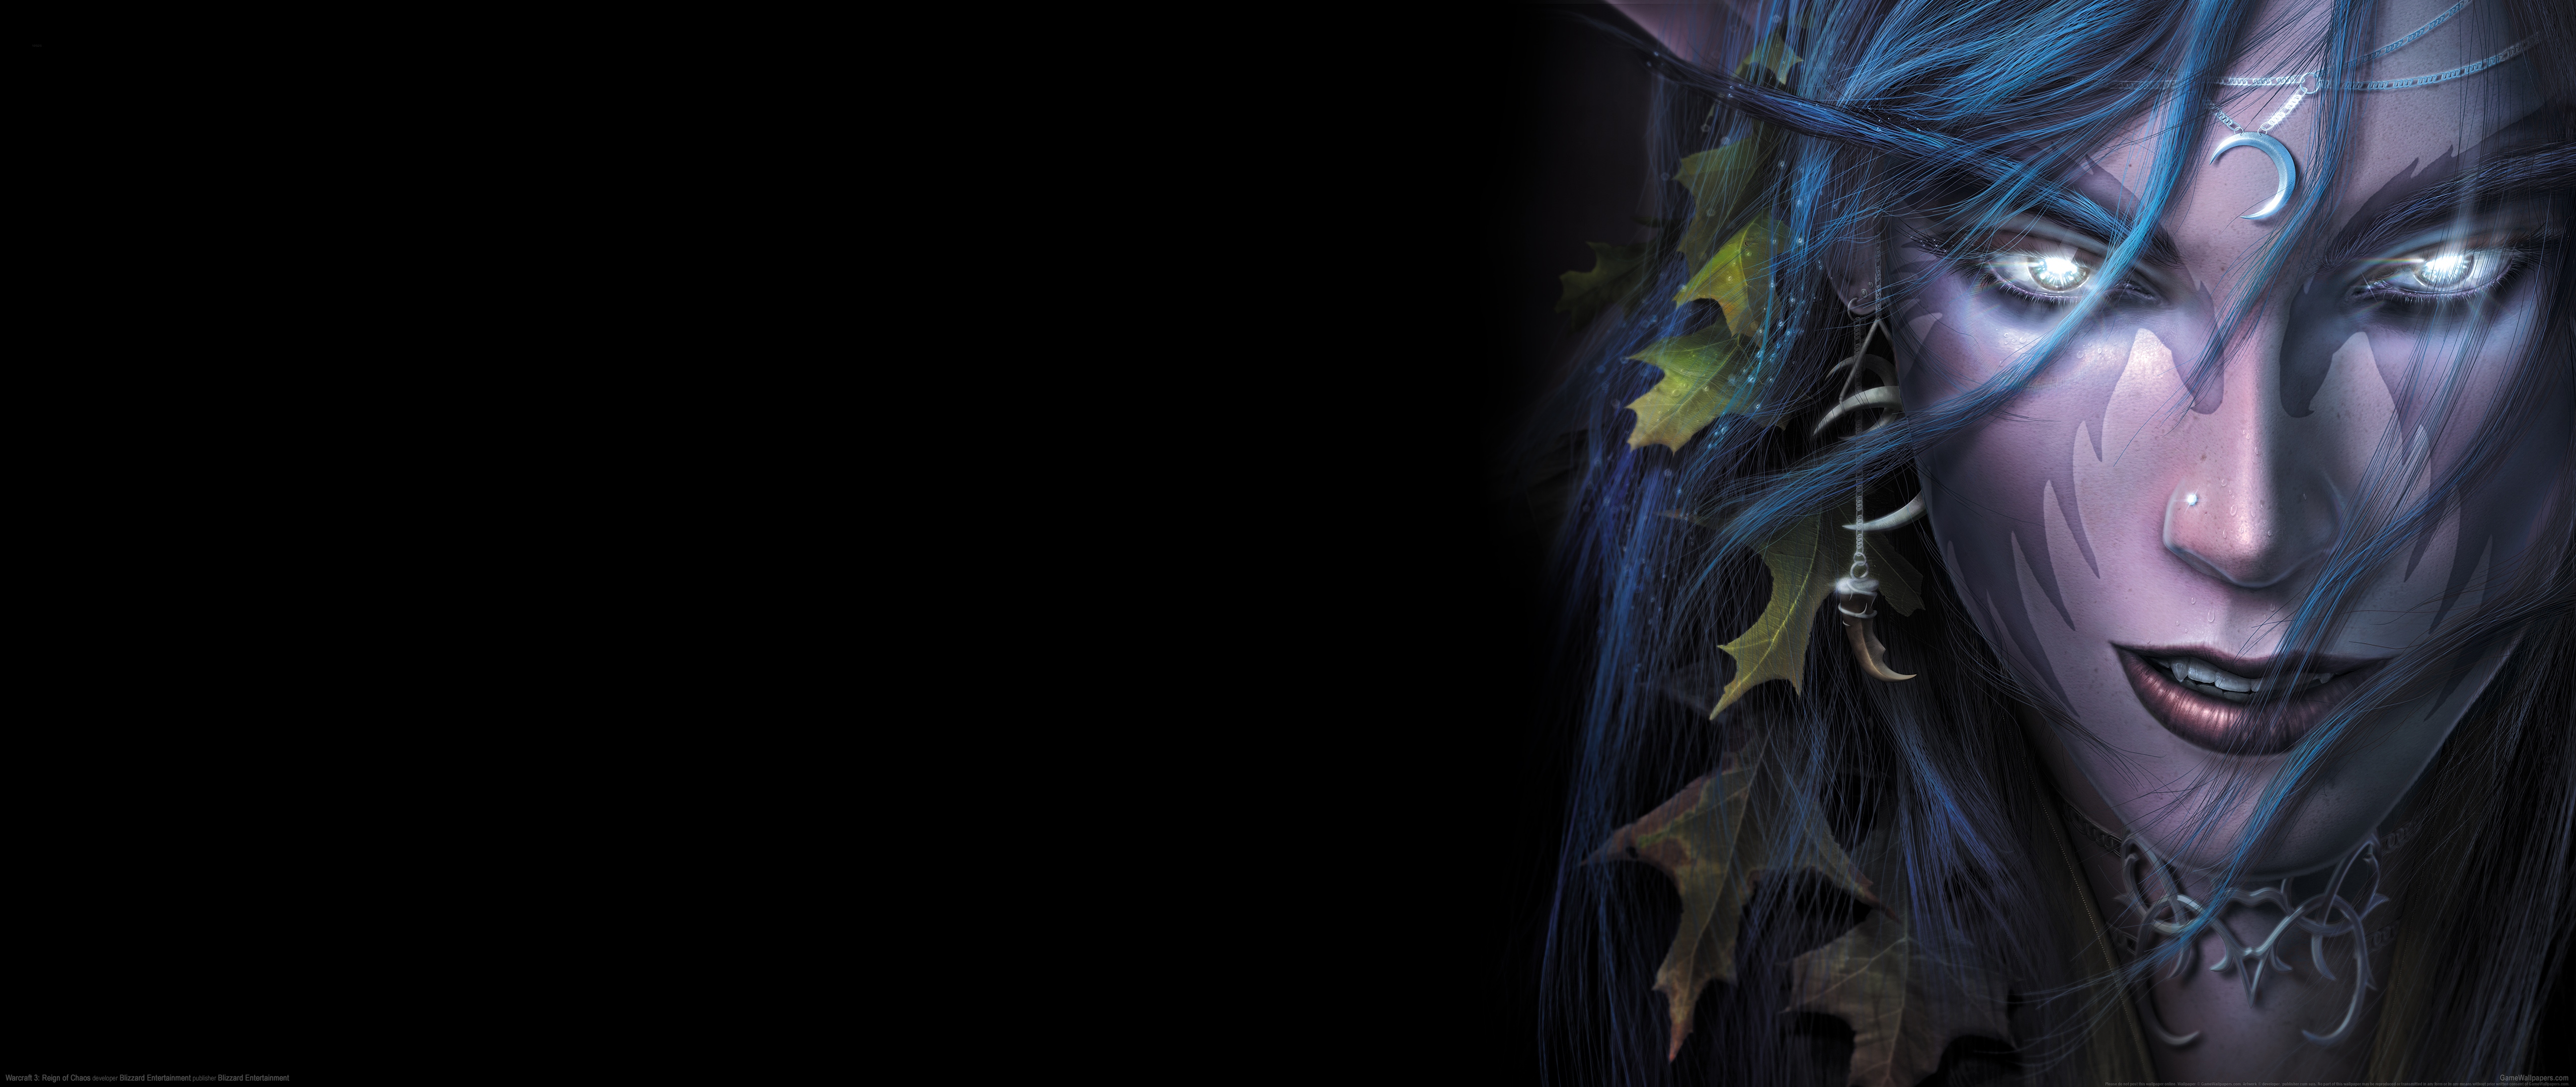 Warcraft 3: Reign of Chaos 5120x2160 wallpaper or background 23